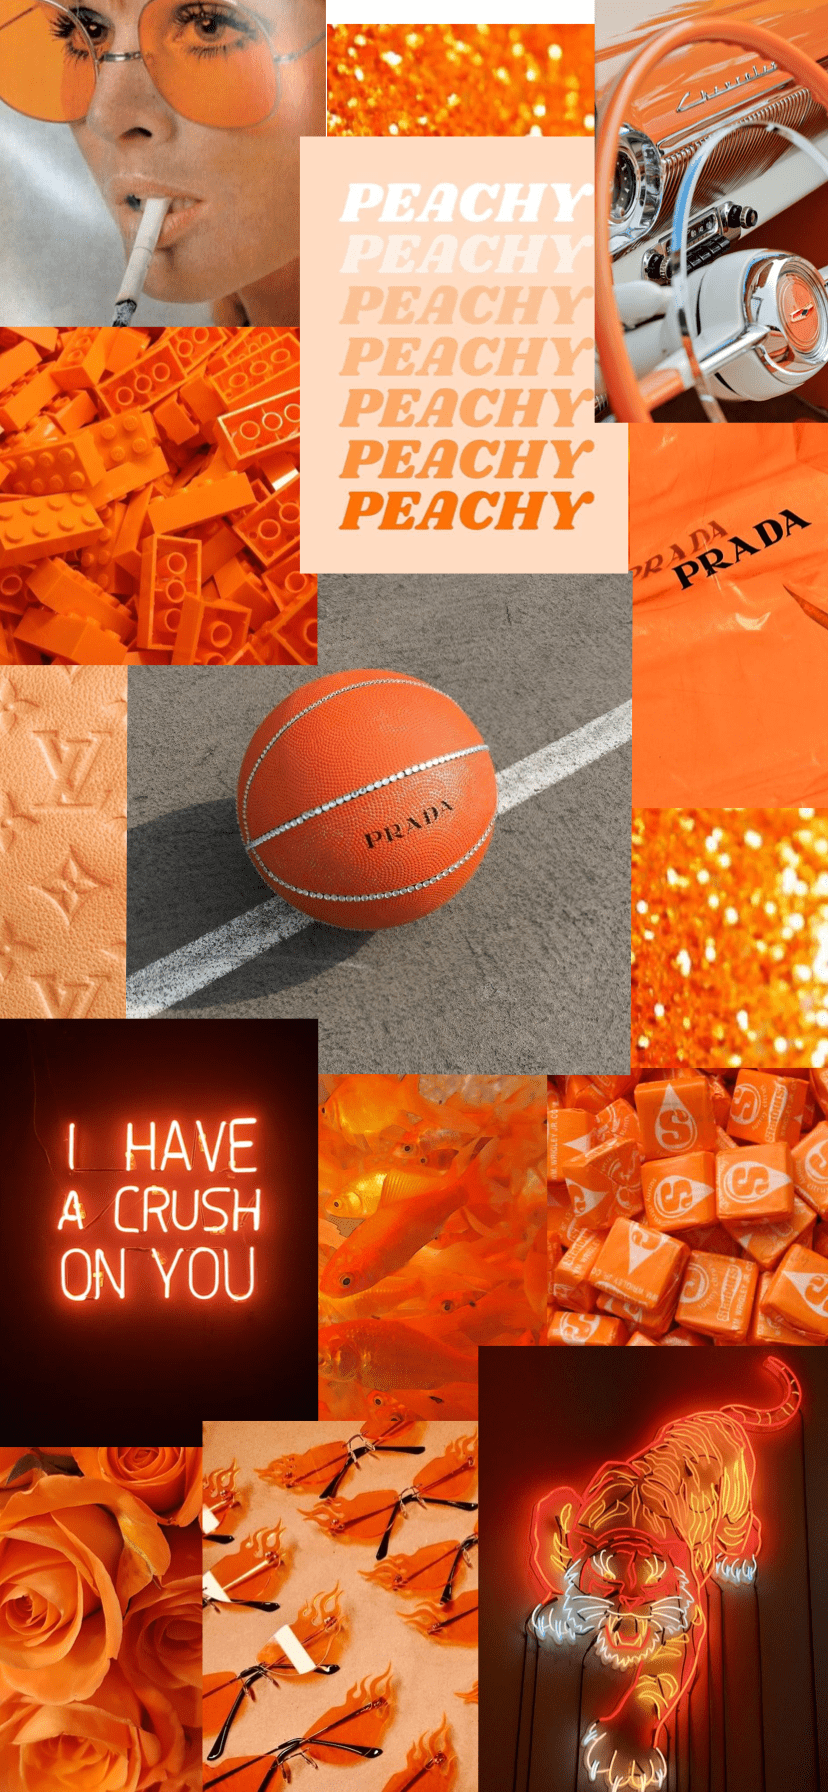 Aesthetic collage of orange and peachy tones, including a basketball, roses, and a Prada logo. - Orange